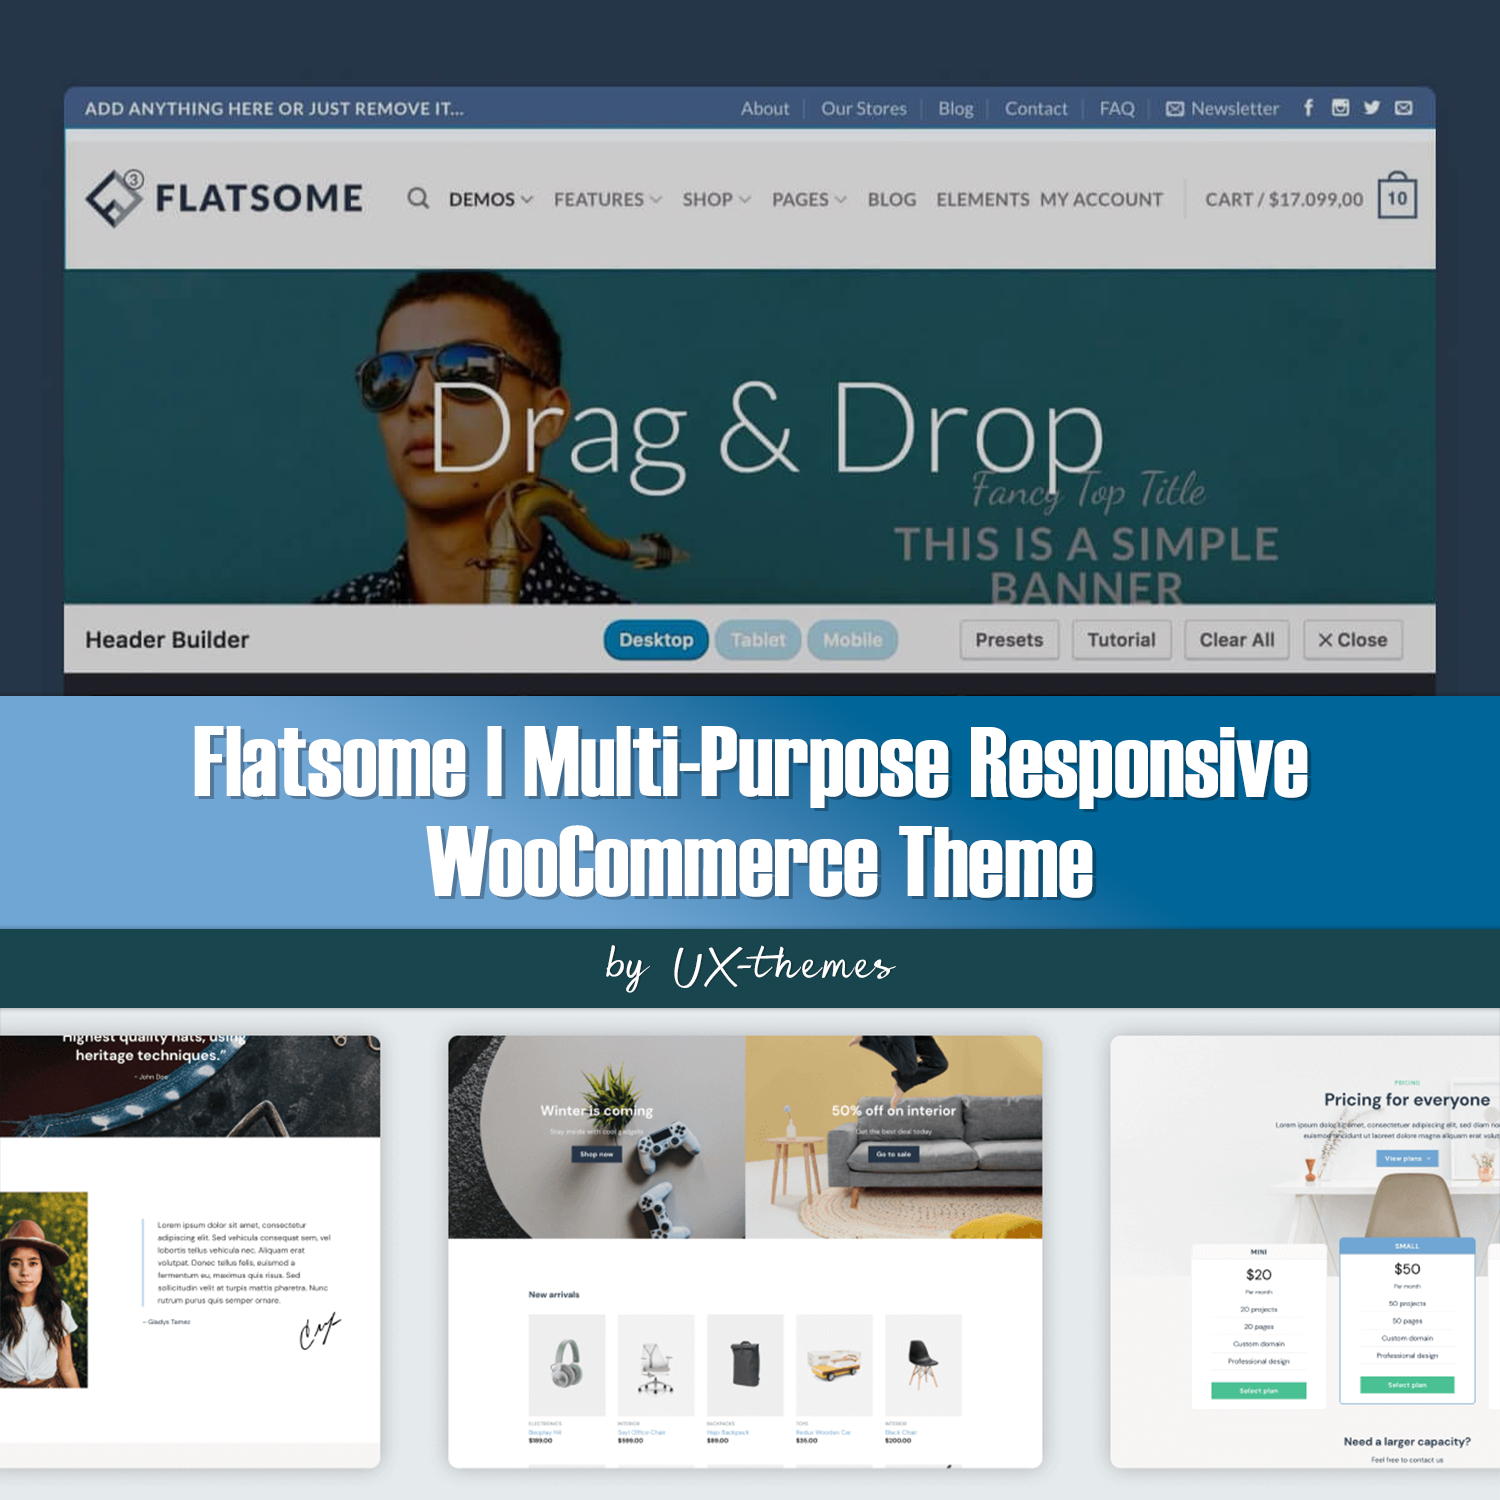 Images with flatsome multi purpose responsive woocommerce theme.